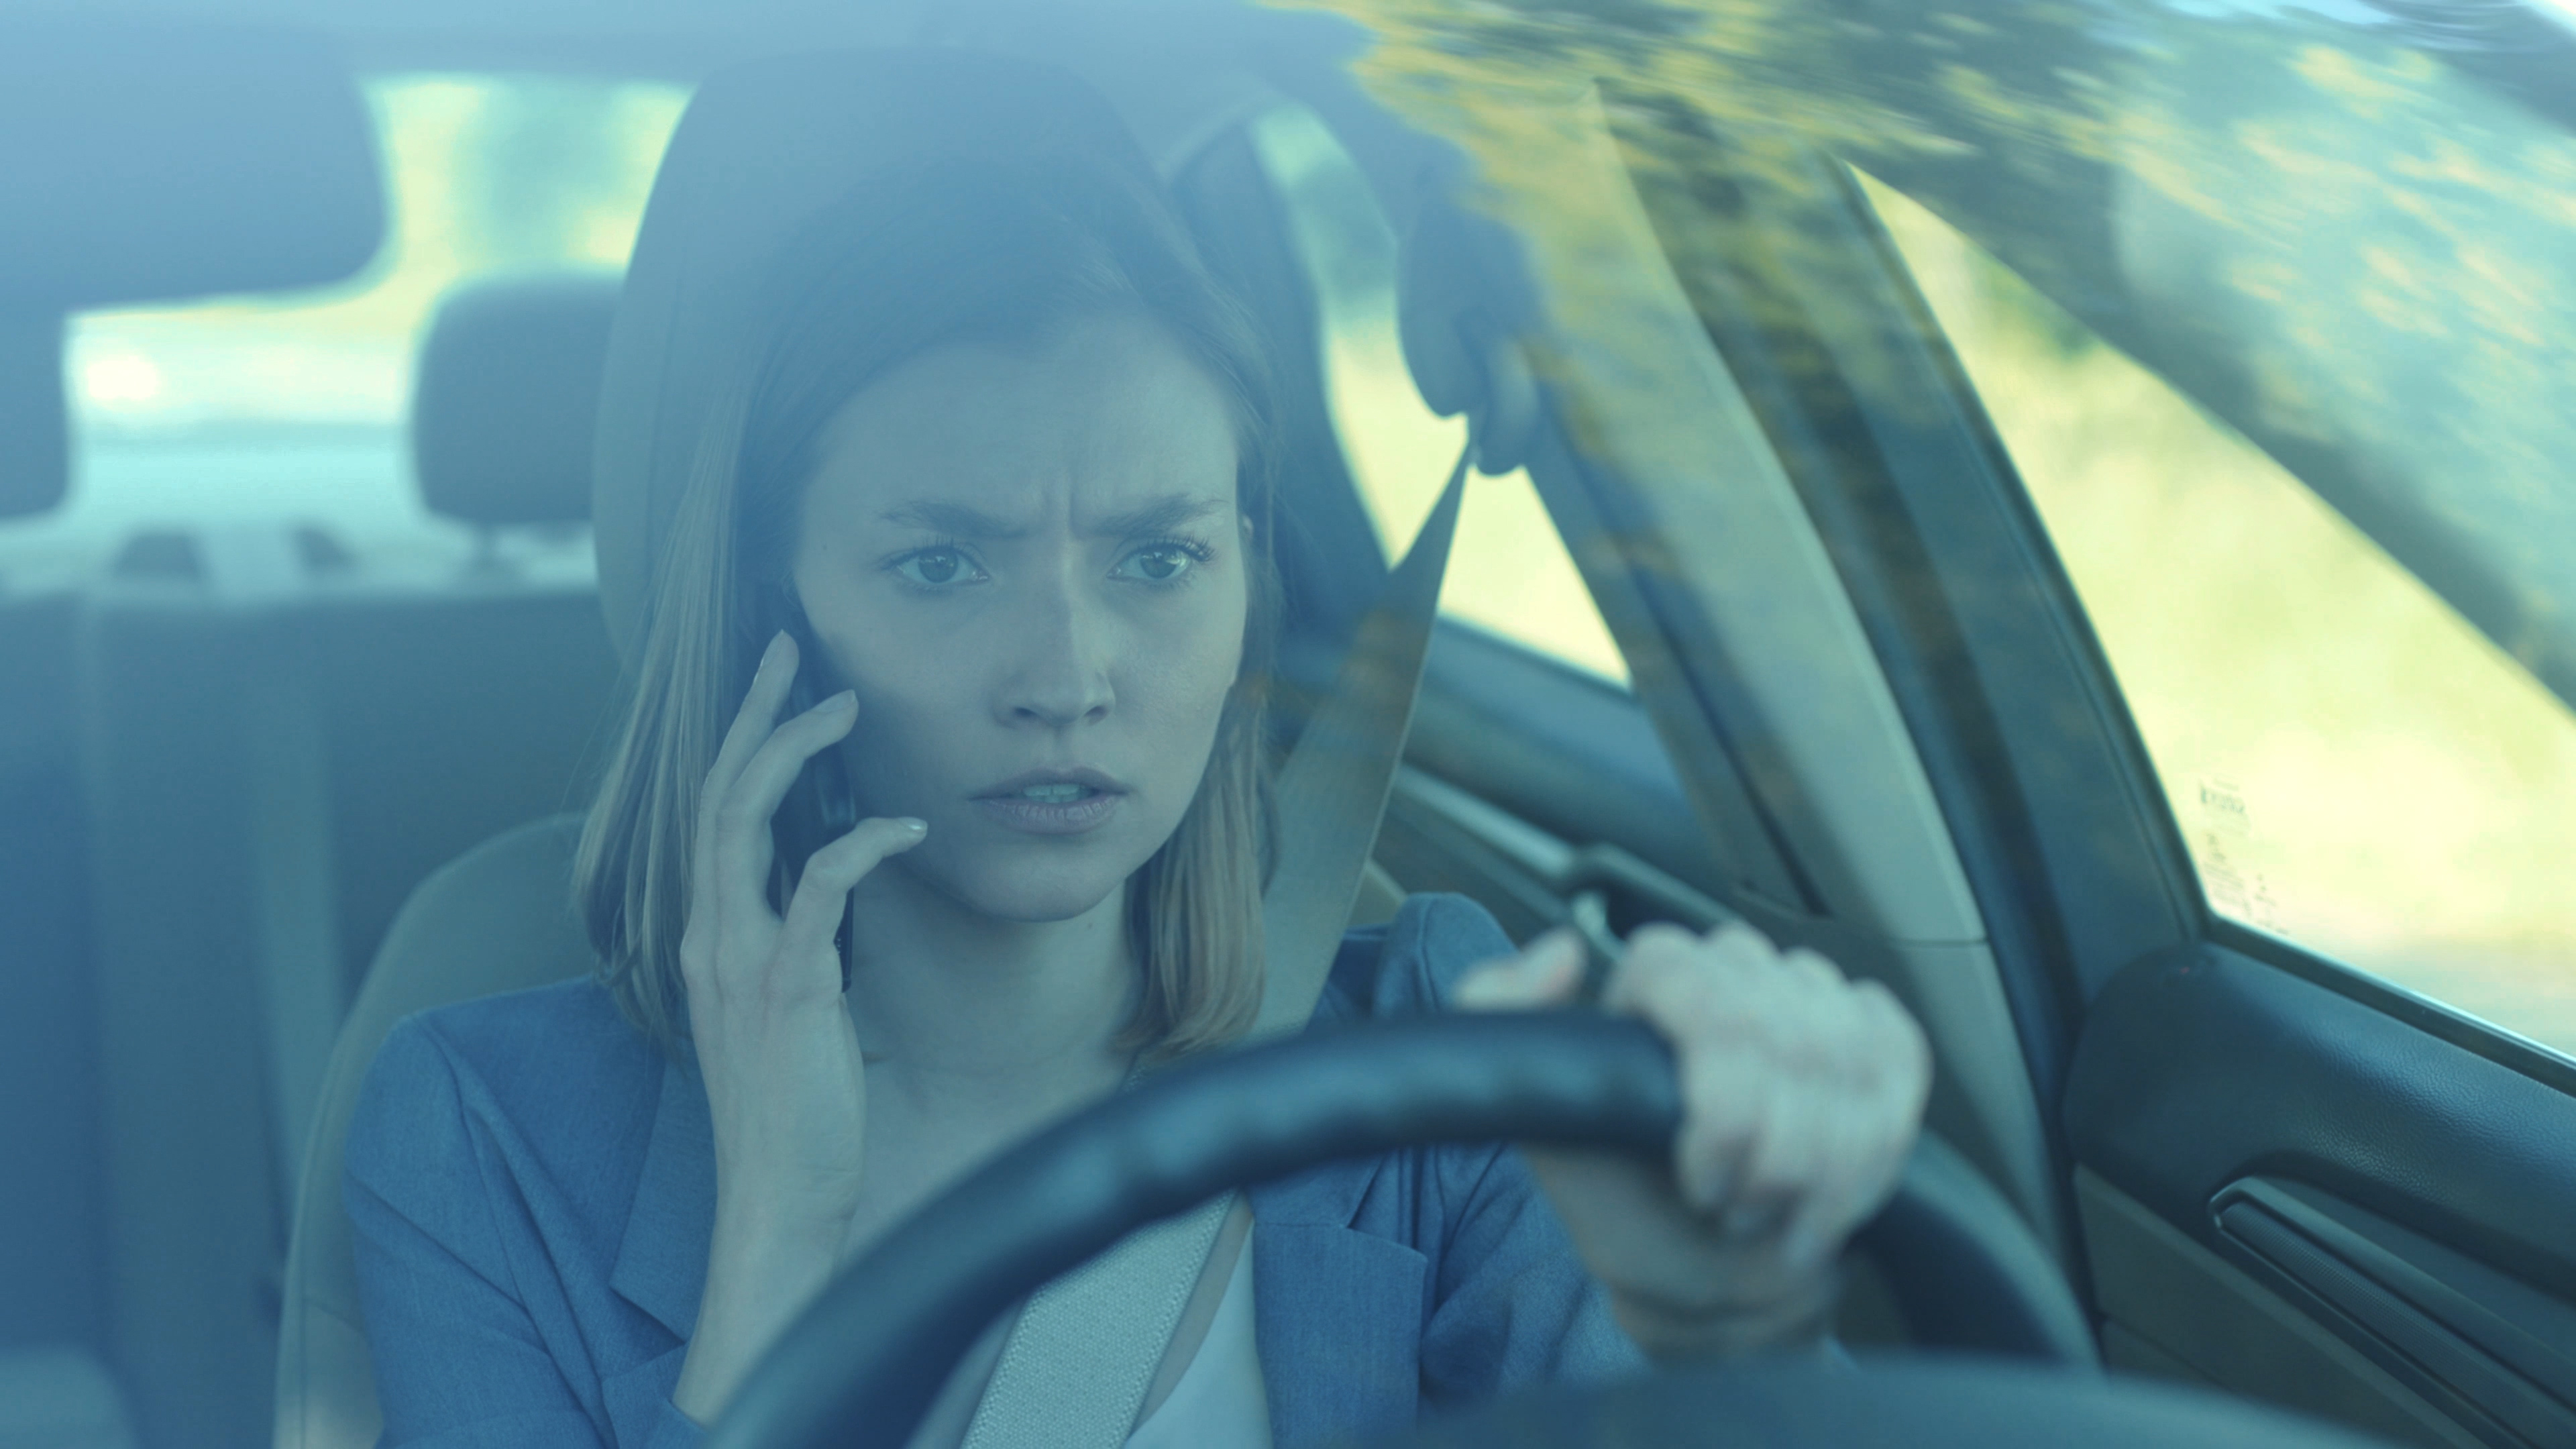 Sad young woman driver talking by phone while driving a car | Source: Shutterstock.com